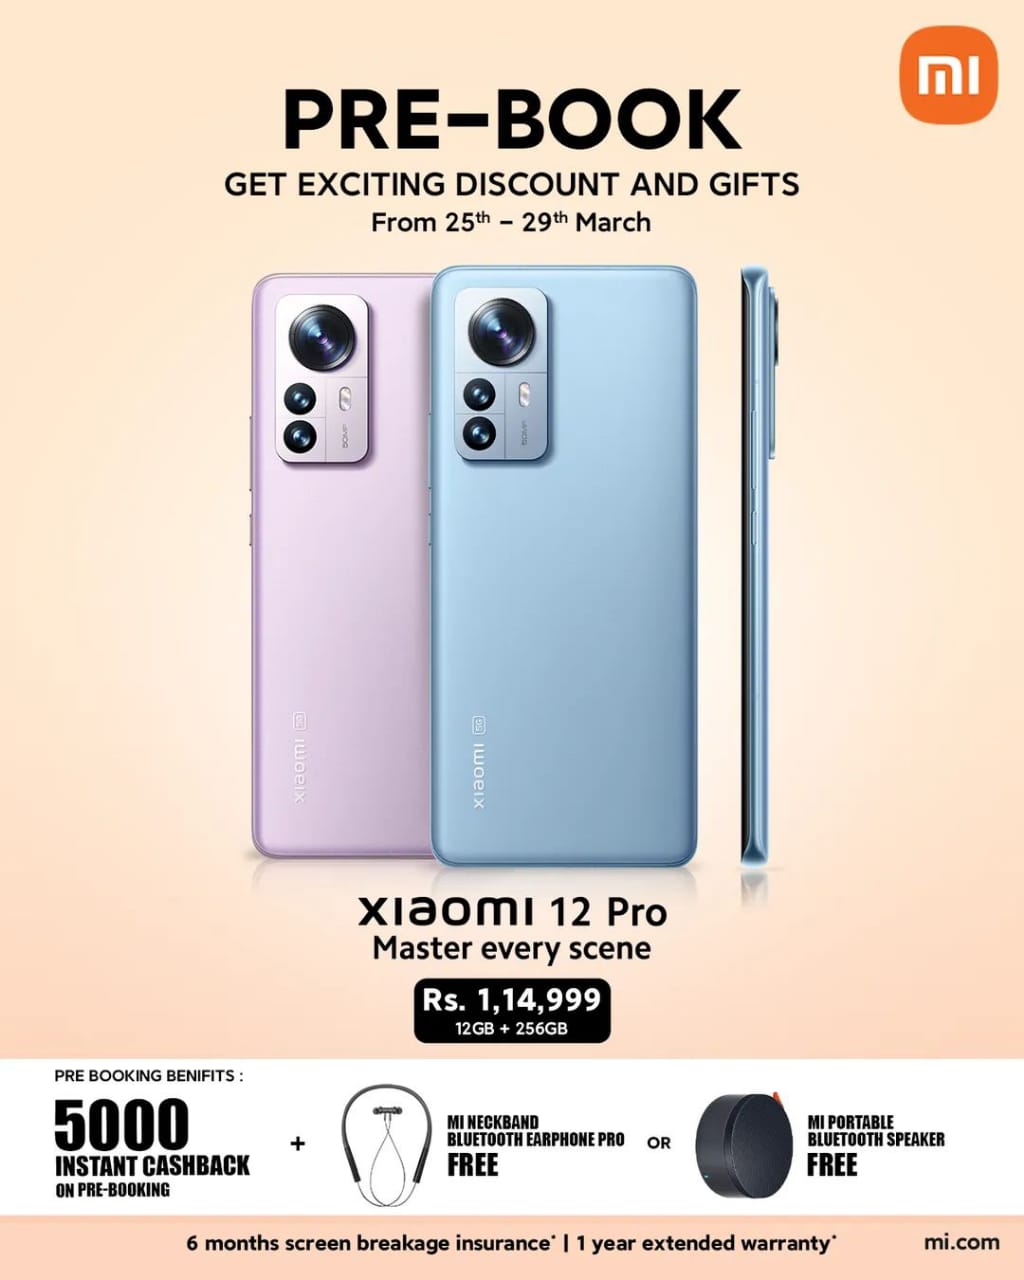 Xiaomi Nepal announces pre-booking for most awaited smartphone-Xiaomi 12 Pro